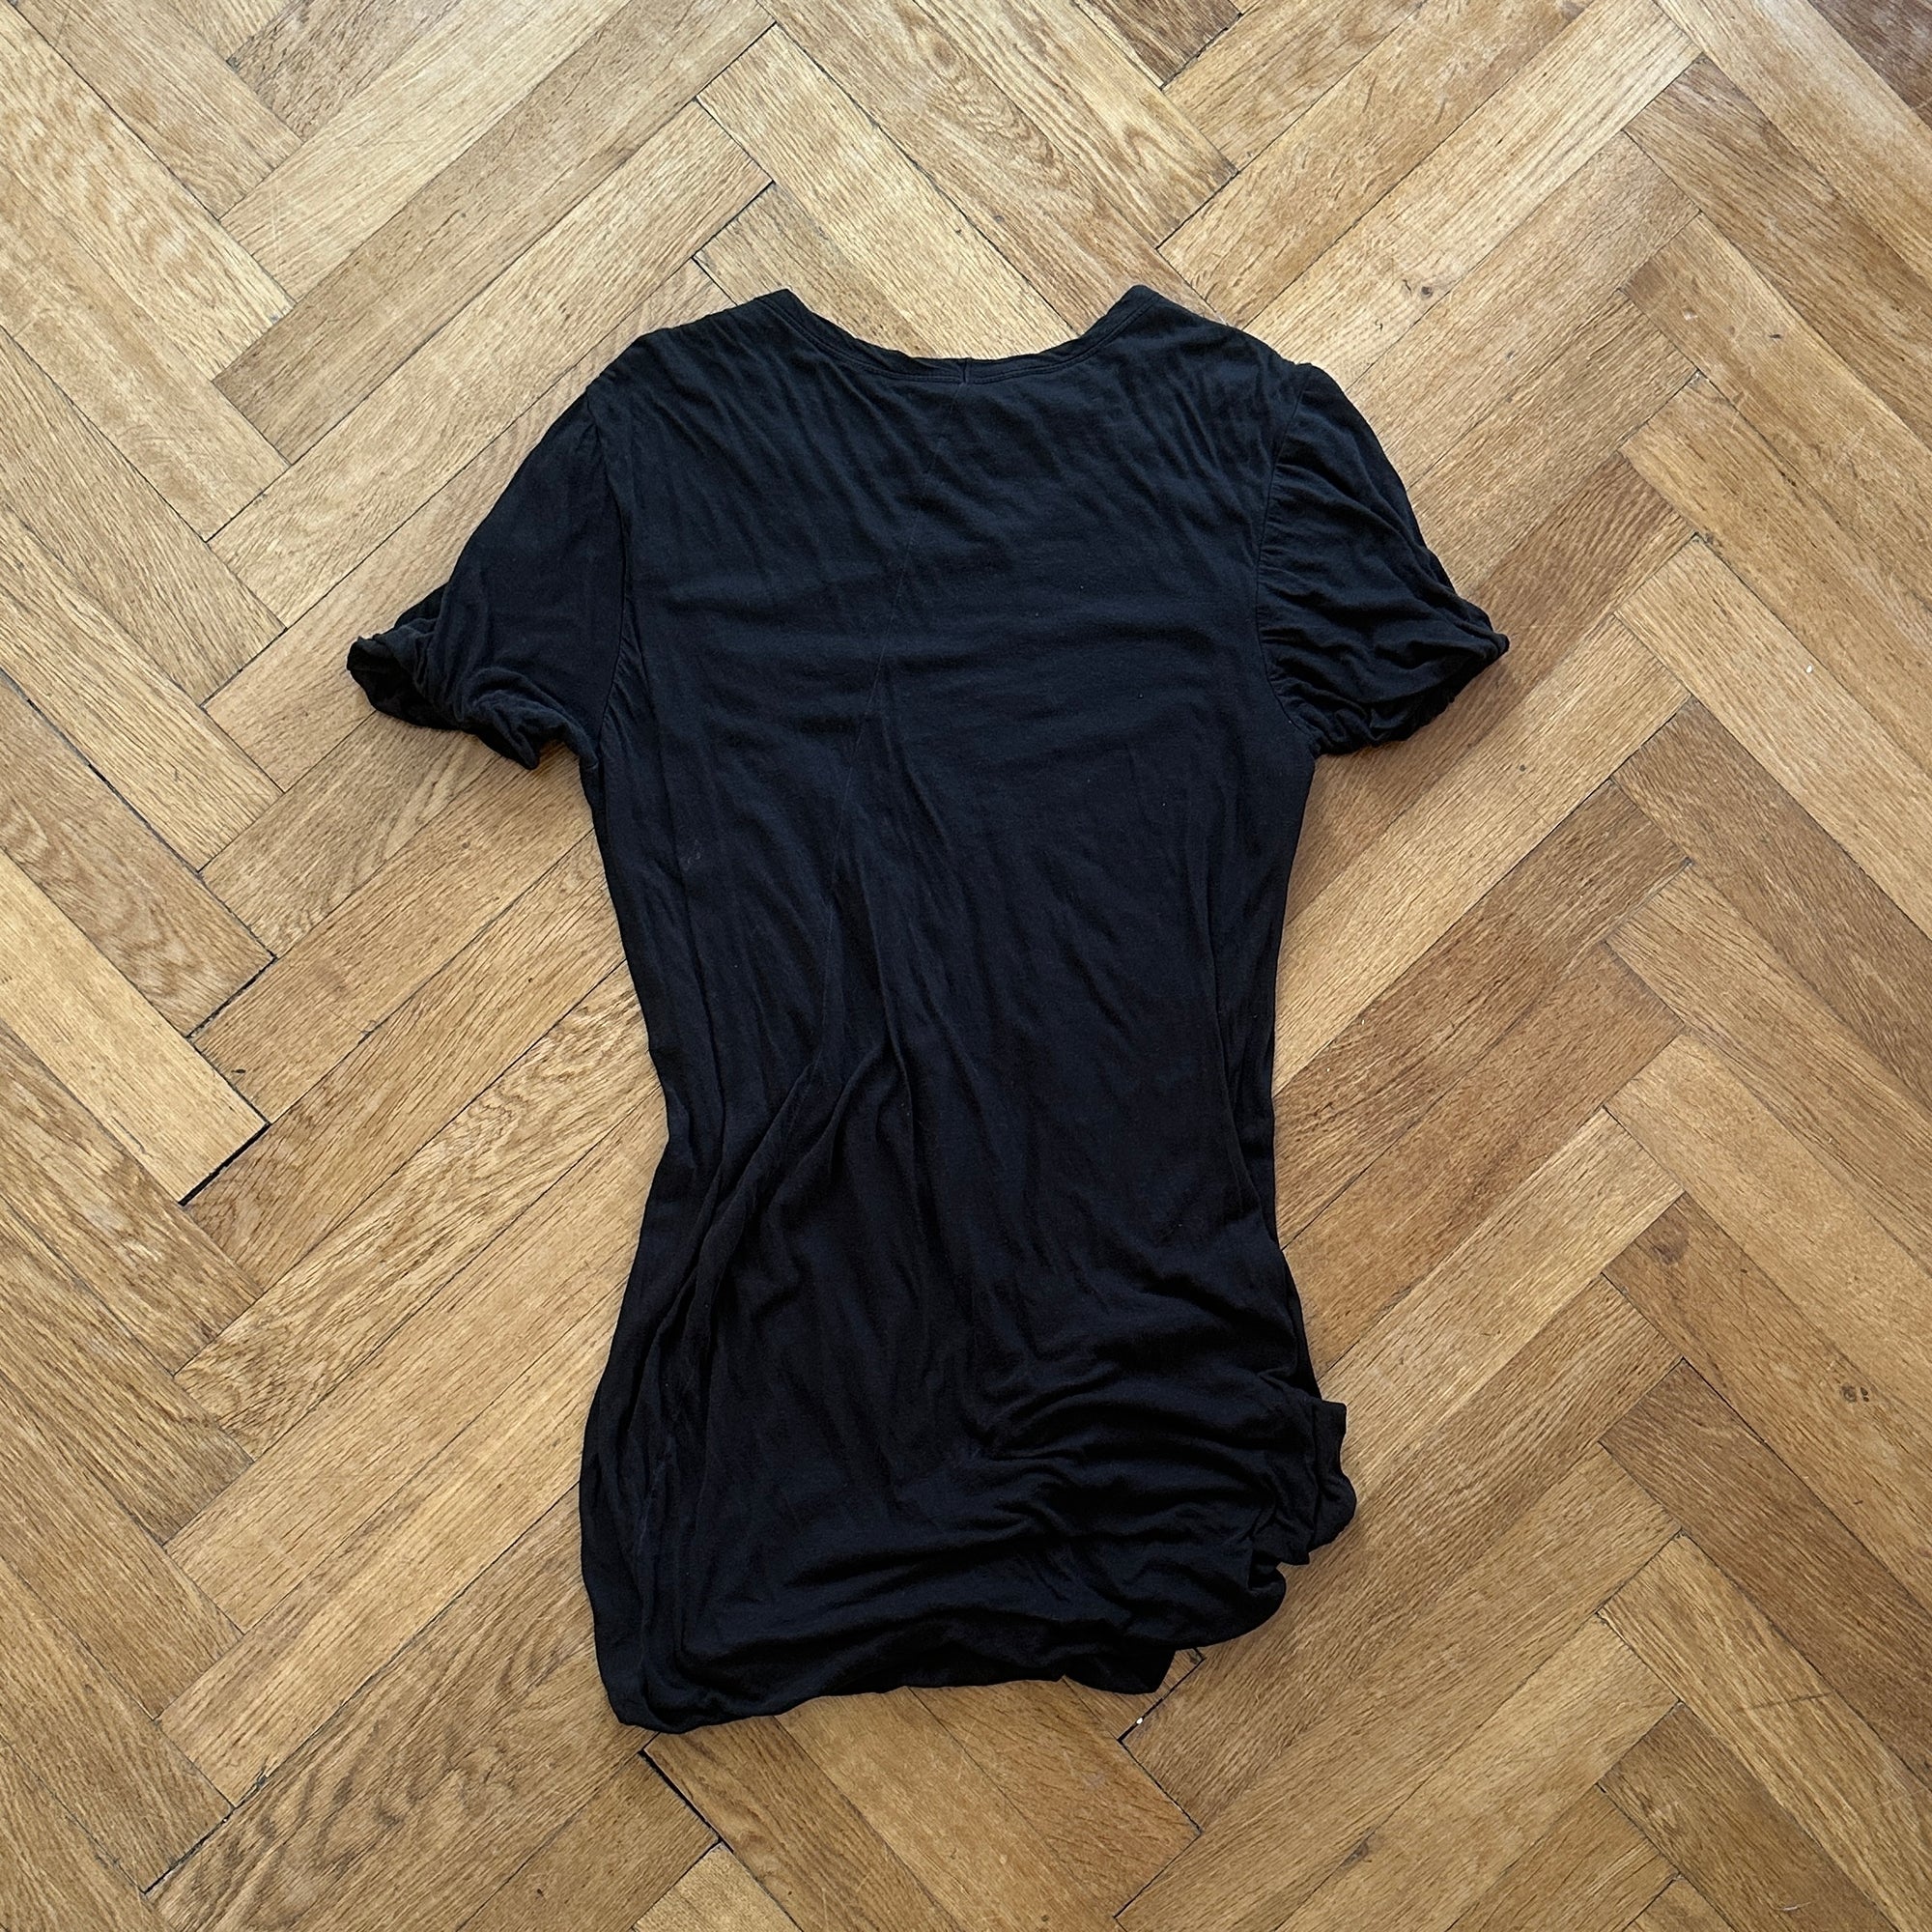 Rick Owens FW14 Moody Black Double Layer T-Shirt